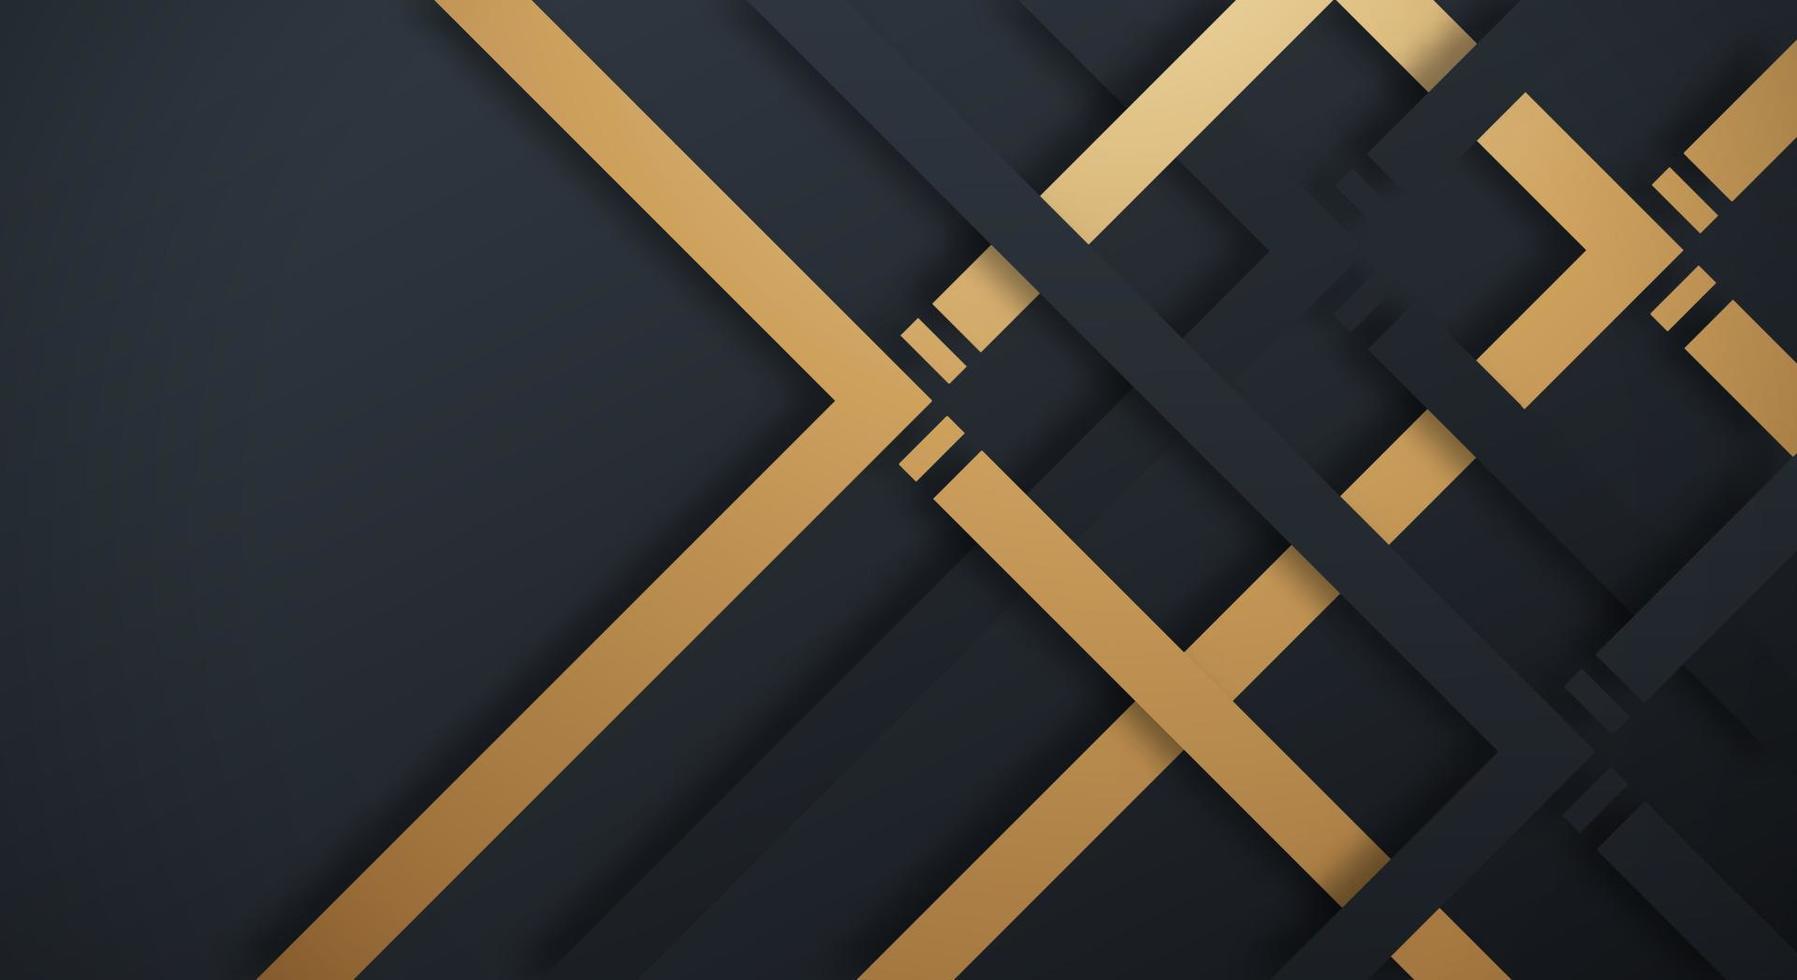 Abstract Dark Navy 3D Background with Gold and Black Lines Paper Cut Style Textured. Usable for Decorative web layout, Poster, Banner, Corporate Brochure and Seminar Template Design vector